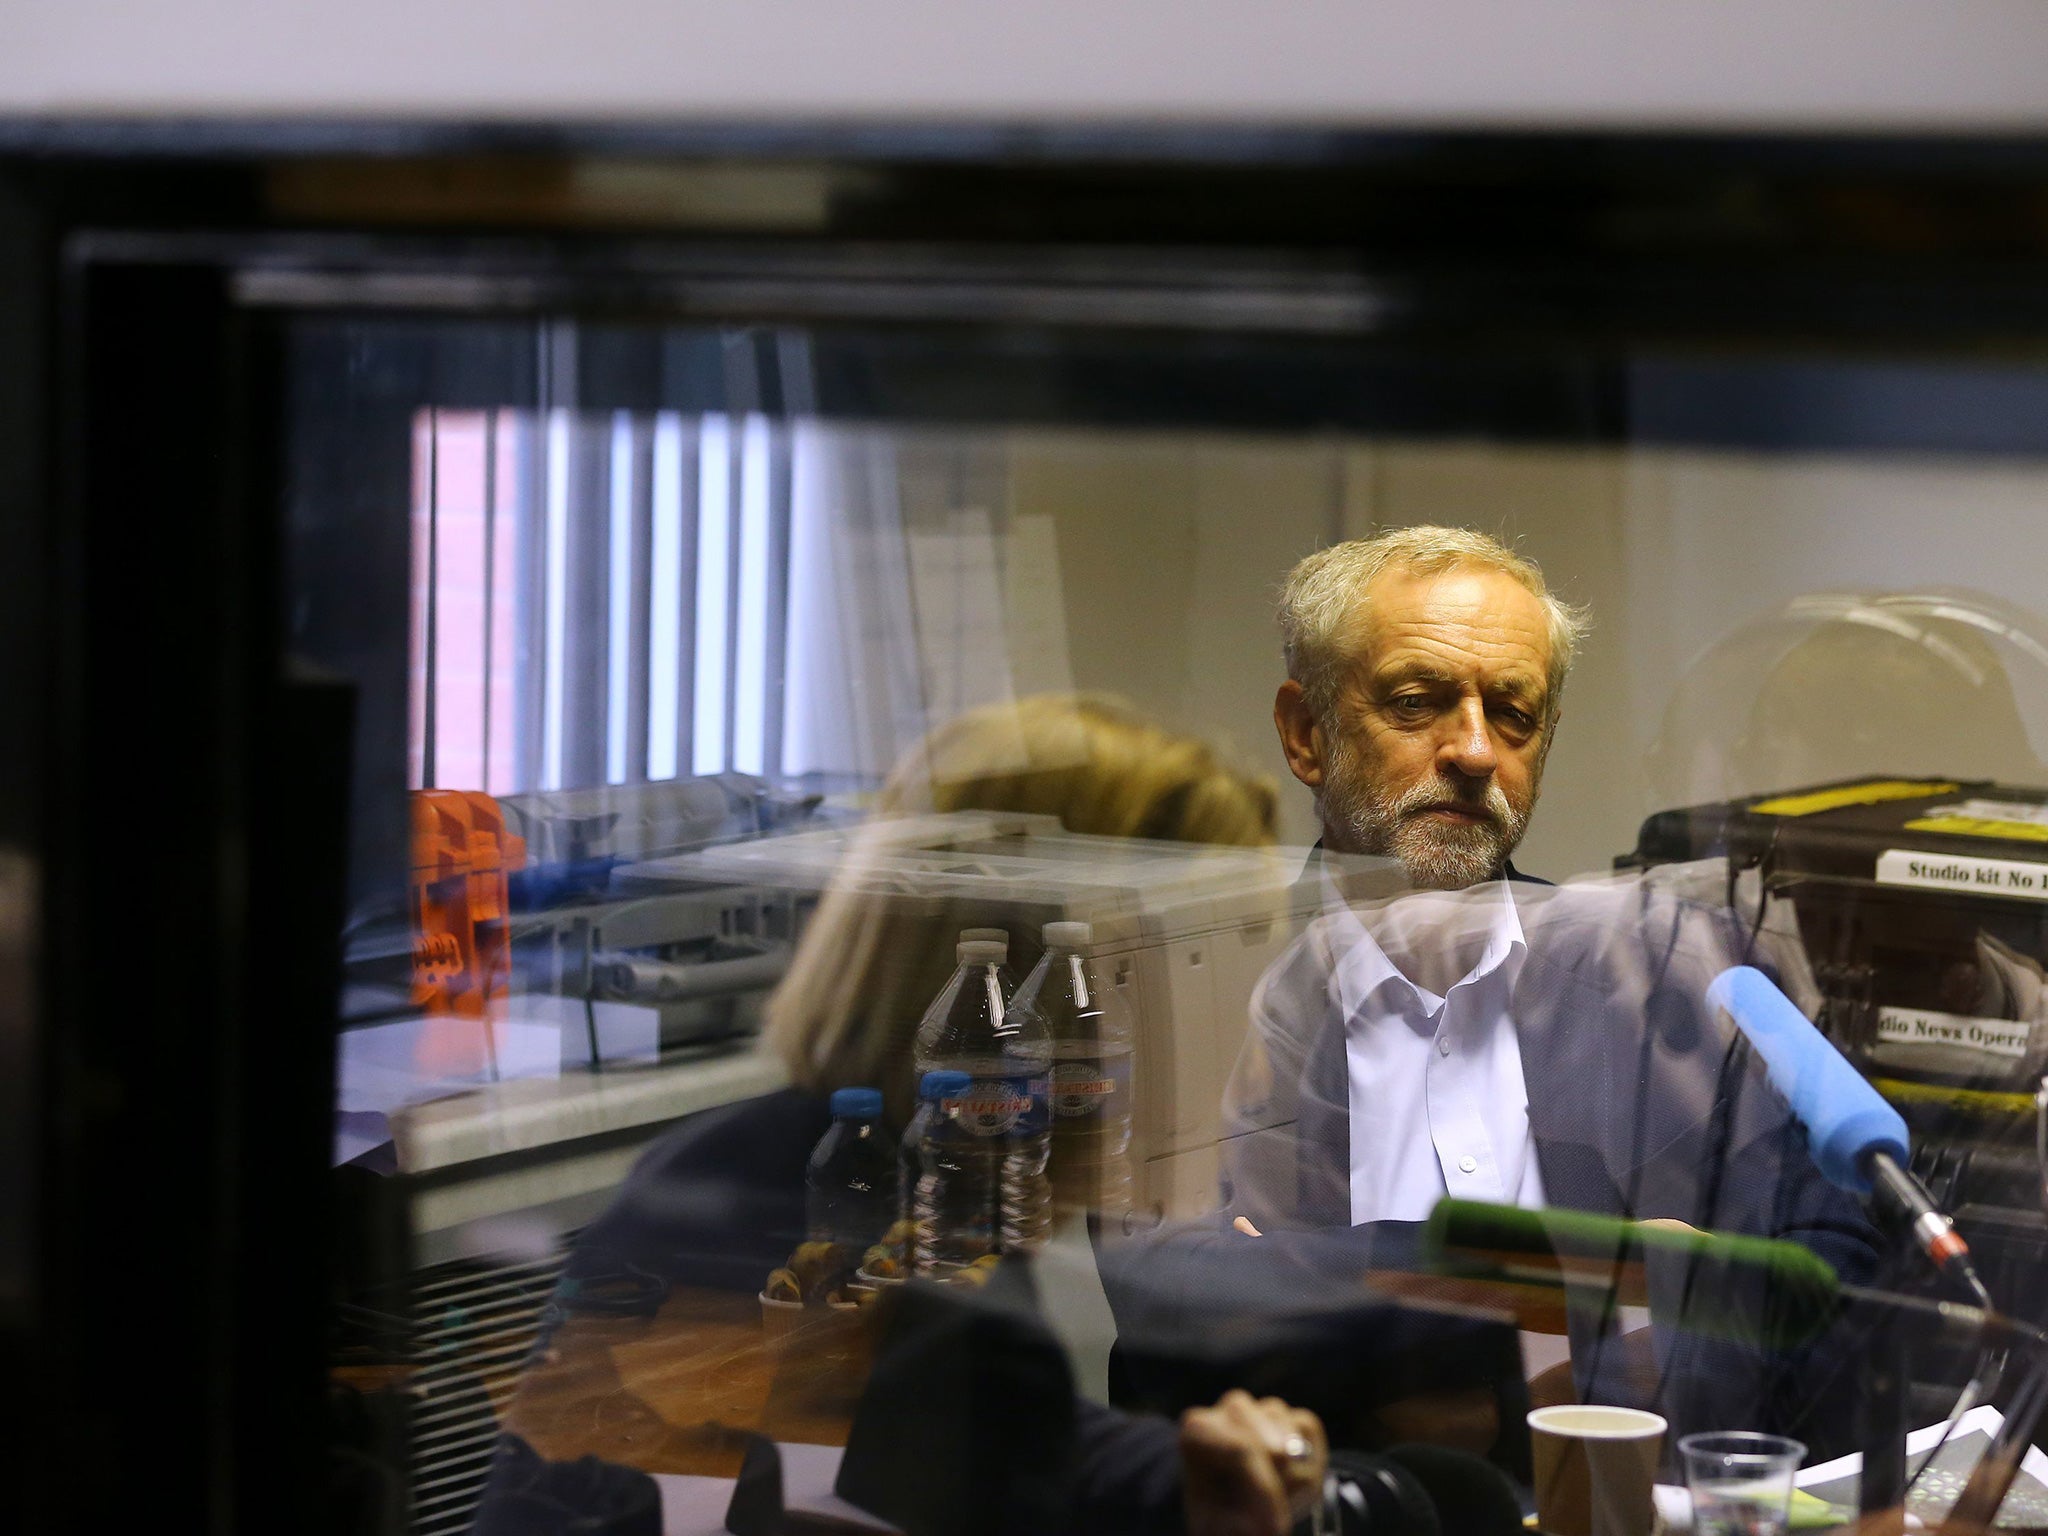 Corbyn discussed his opposition to nuclear weapons while appearing on BBC Radio 4's Today programme